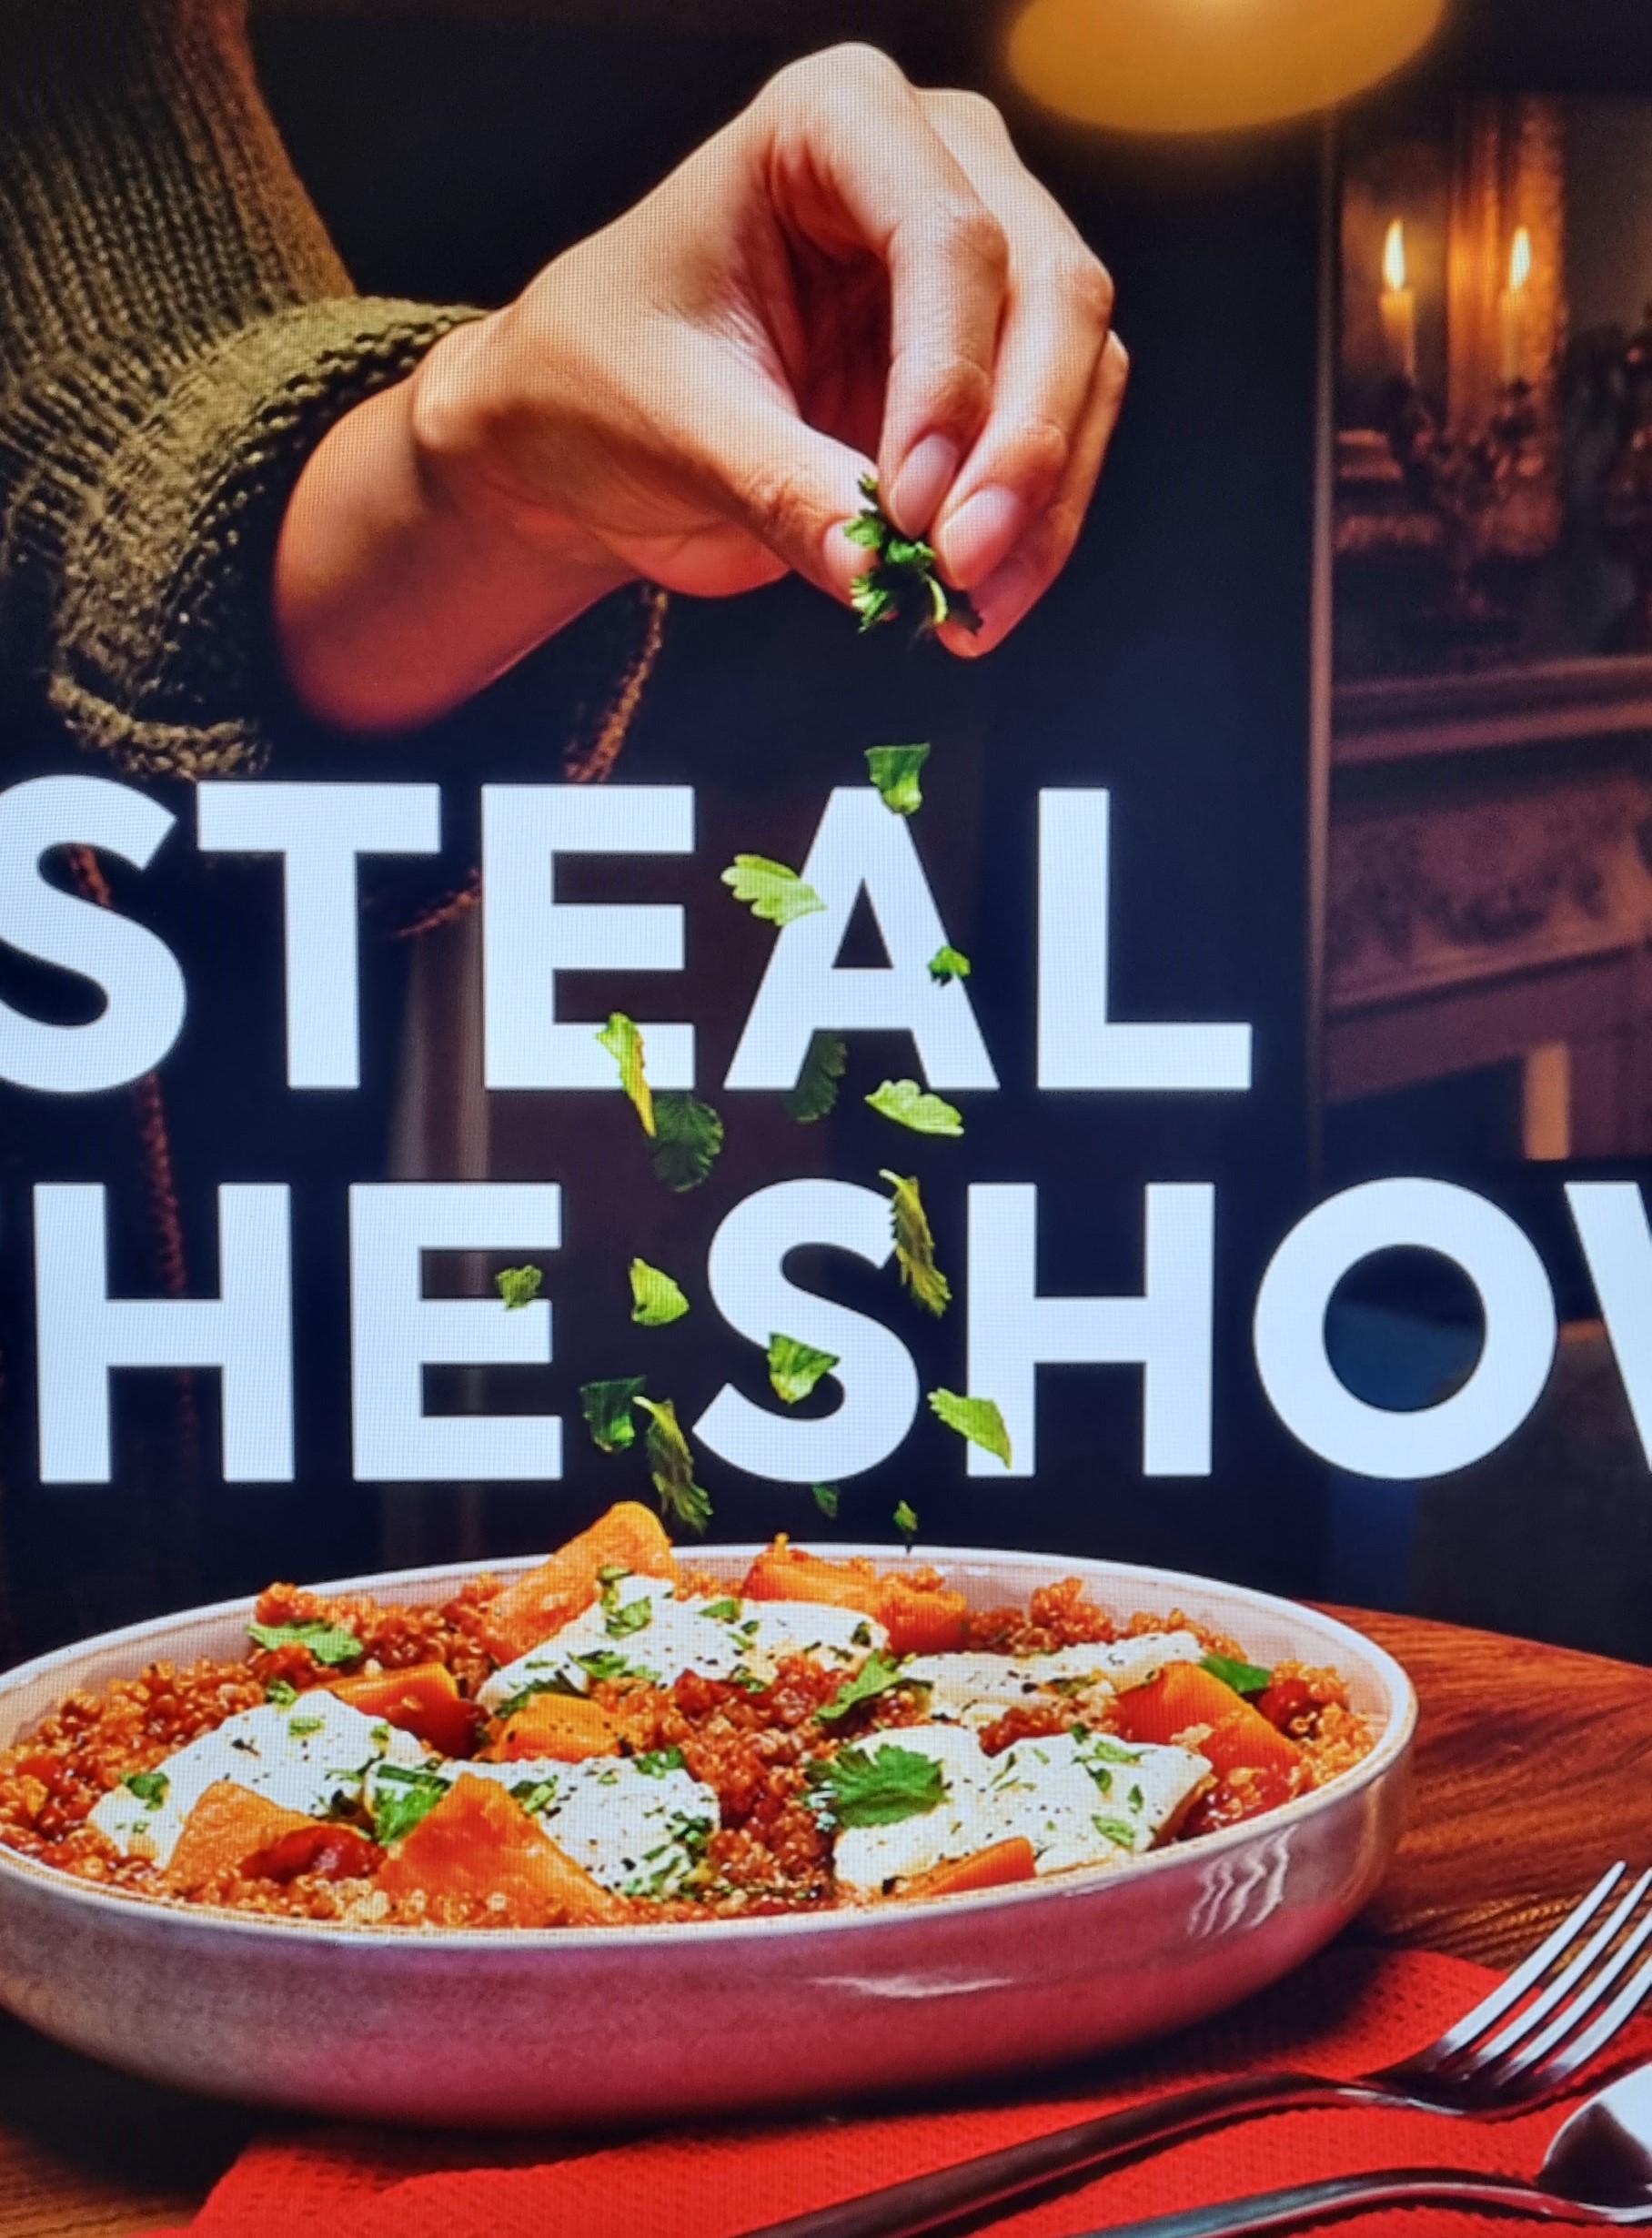 A photo of the TV ad showing a hand sprinkling coriander leaves over a dish, with two lines of text placed in amongst the individual leaves to give a layered effect.